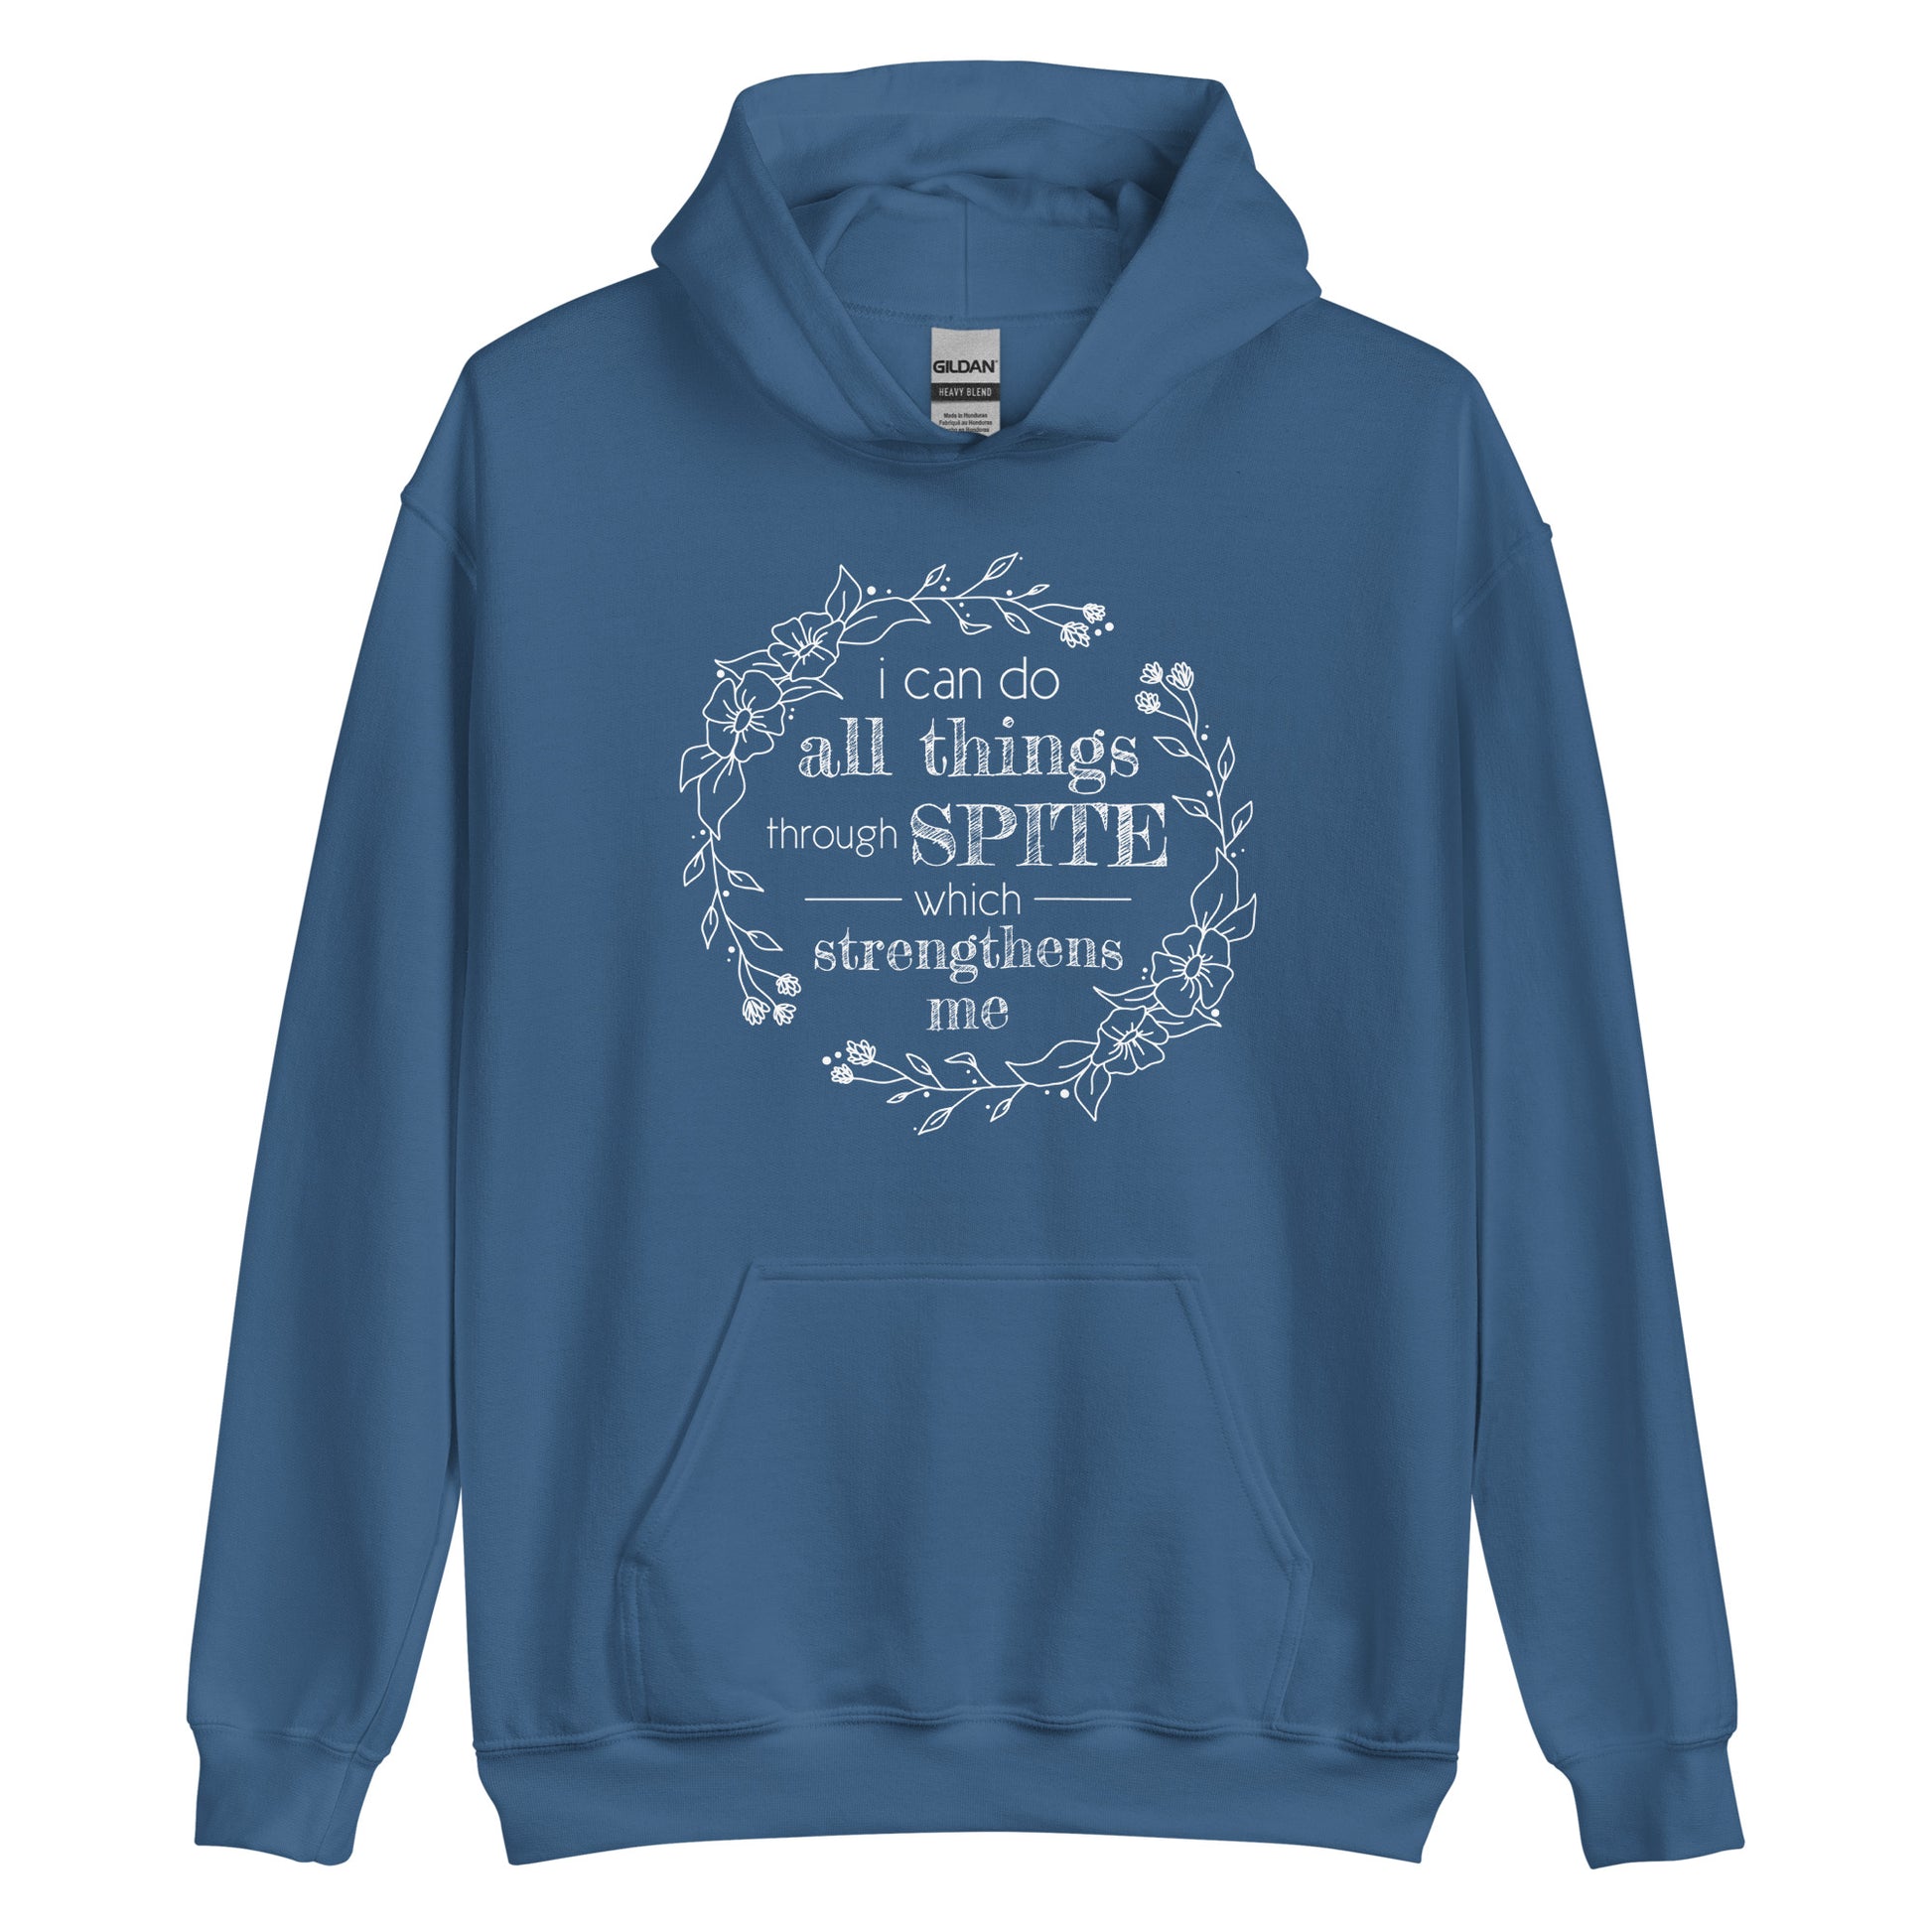 A blue hooded sweatshirt featuring an illustration of a floral wreath. Text inside the flowers reads "i can do all things through SPITE which strengthens me"